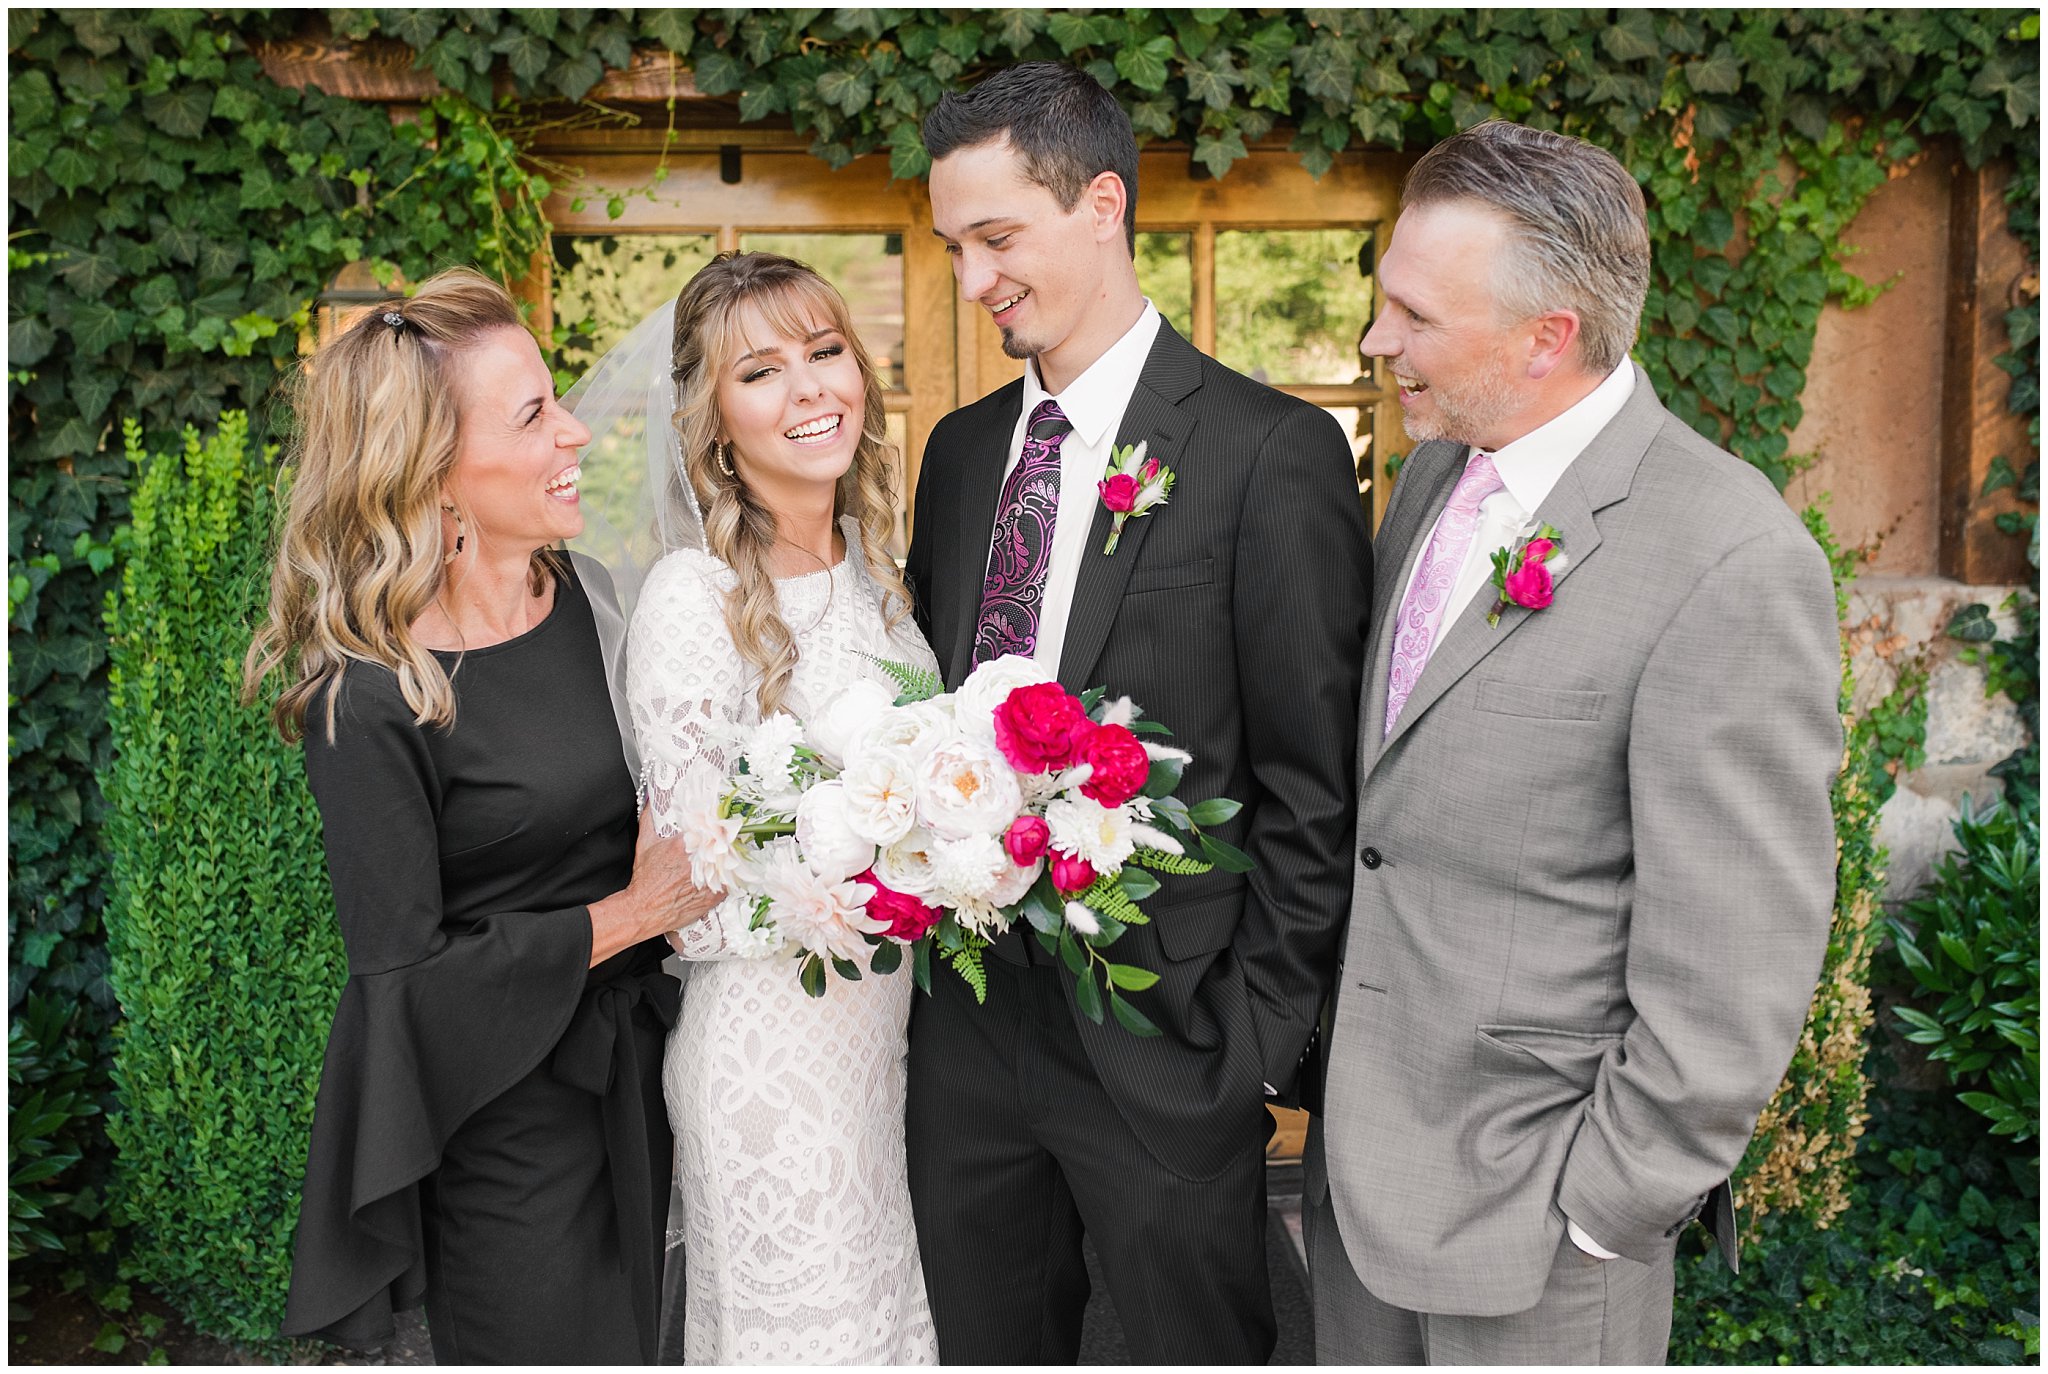 Family photos at Wadley Farms Summer Wedding | Jessie and Dallin Photography